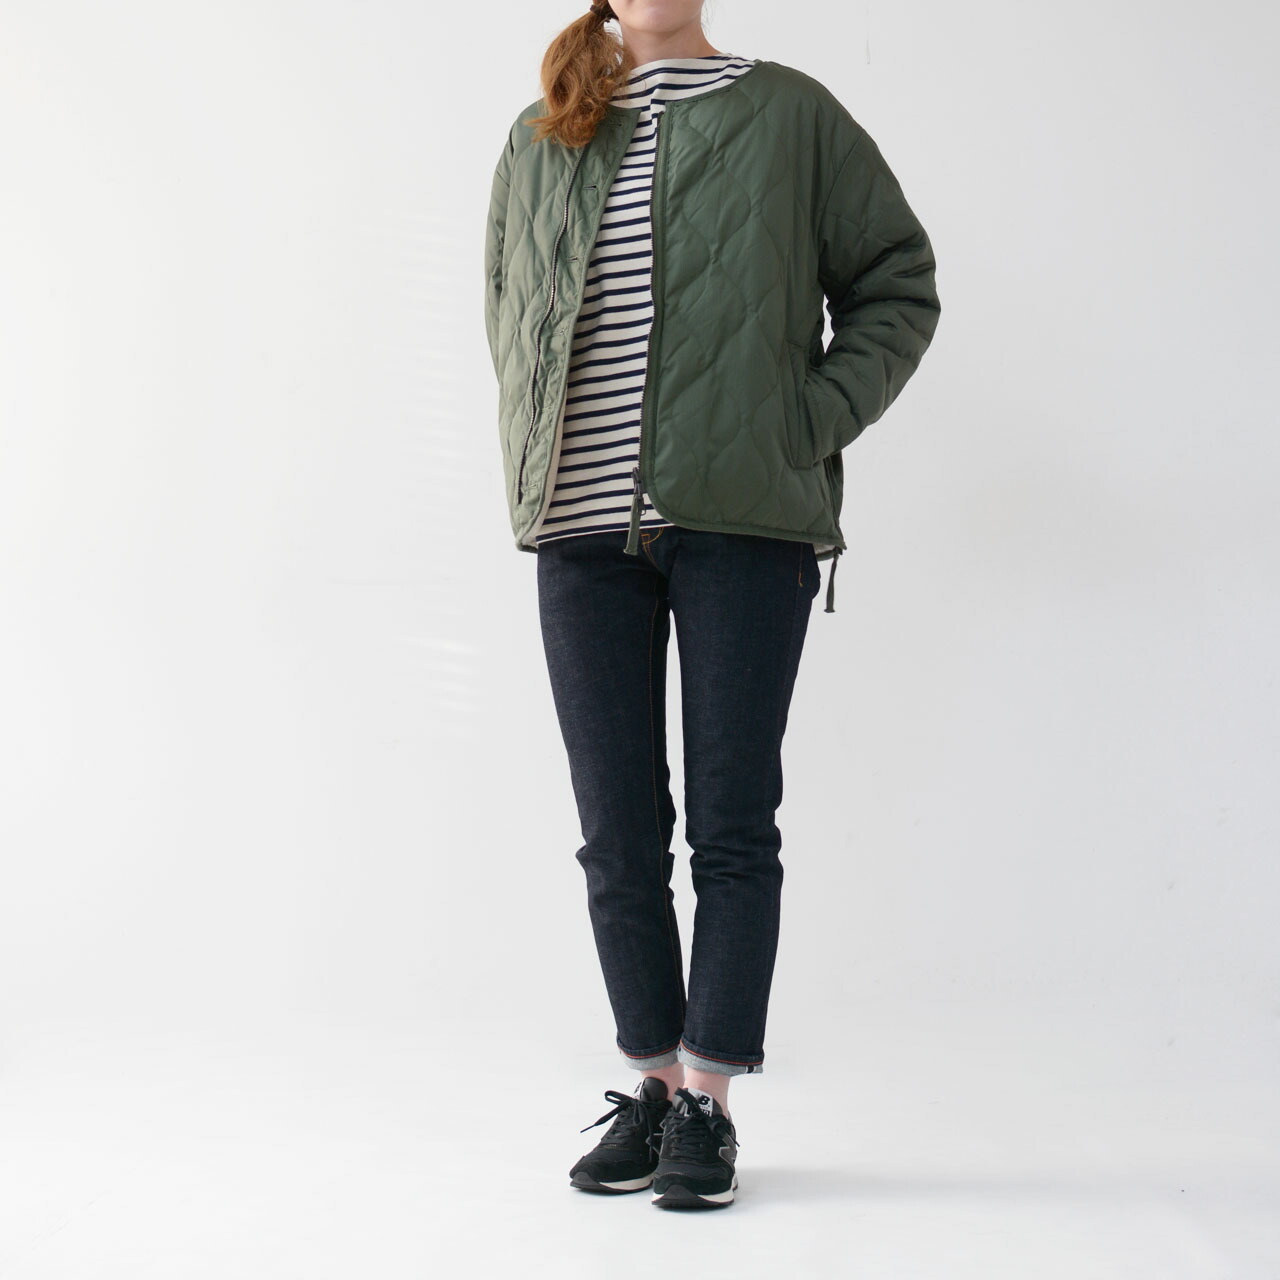 TAION [タイオン] MILITARY RIVERSIBLE CREW NECK DOWN JKT [R104BML-1] _f0051306_15371411.jpg